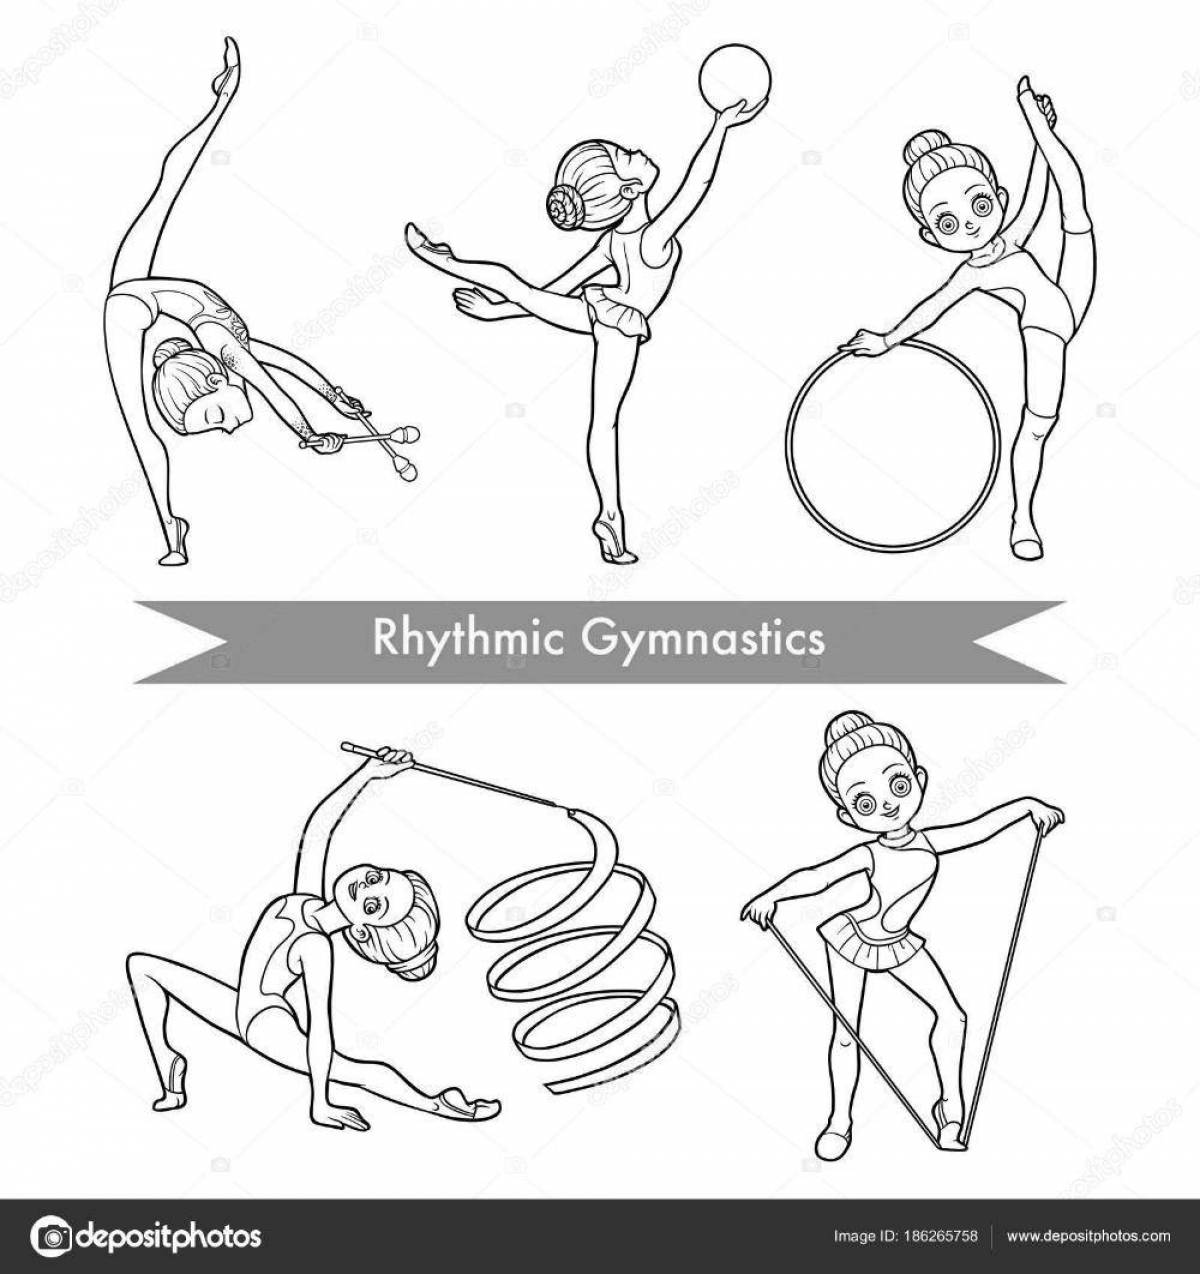 Animated rhythmic gymnastics coloring pages